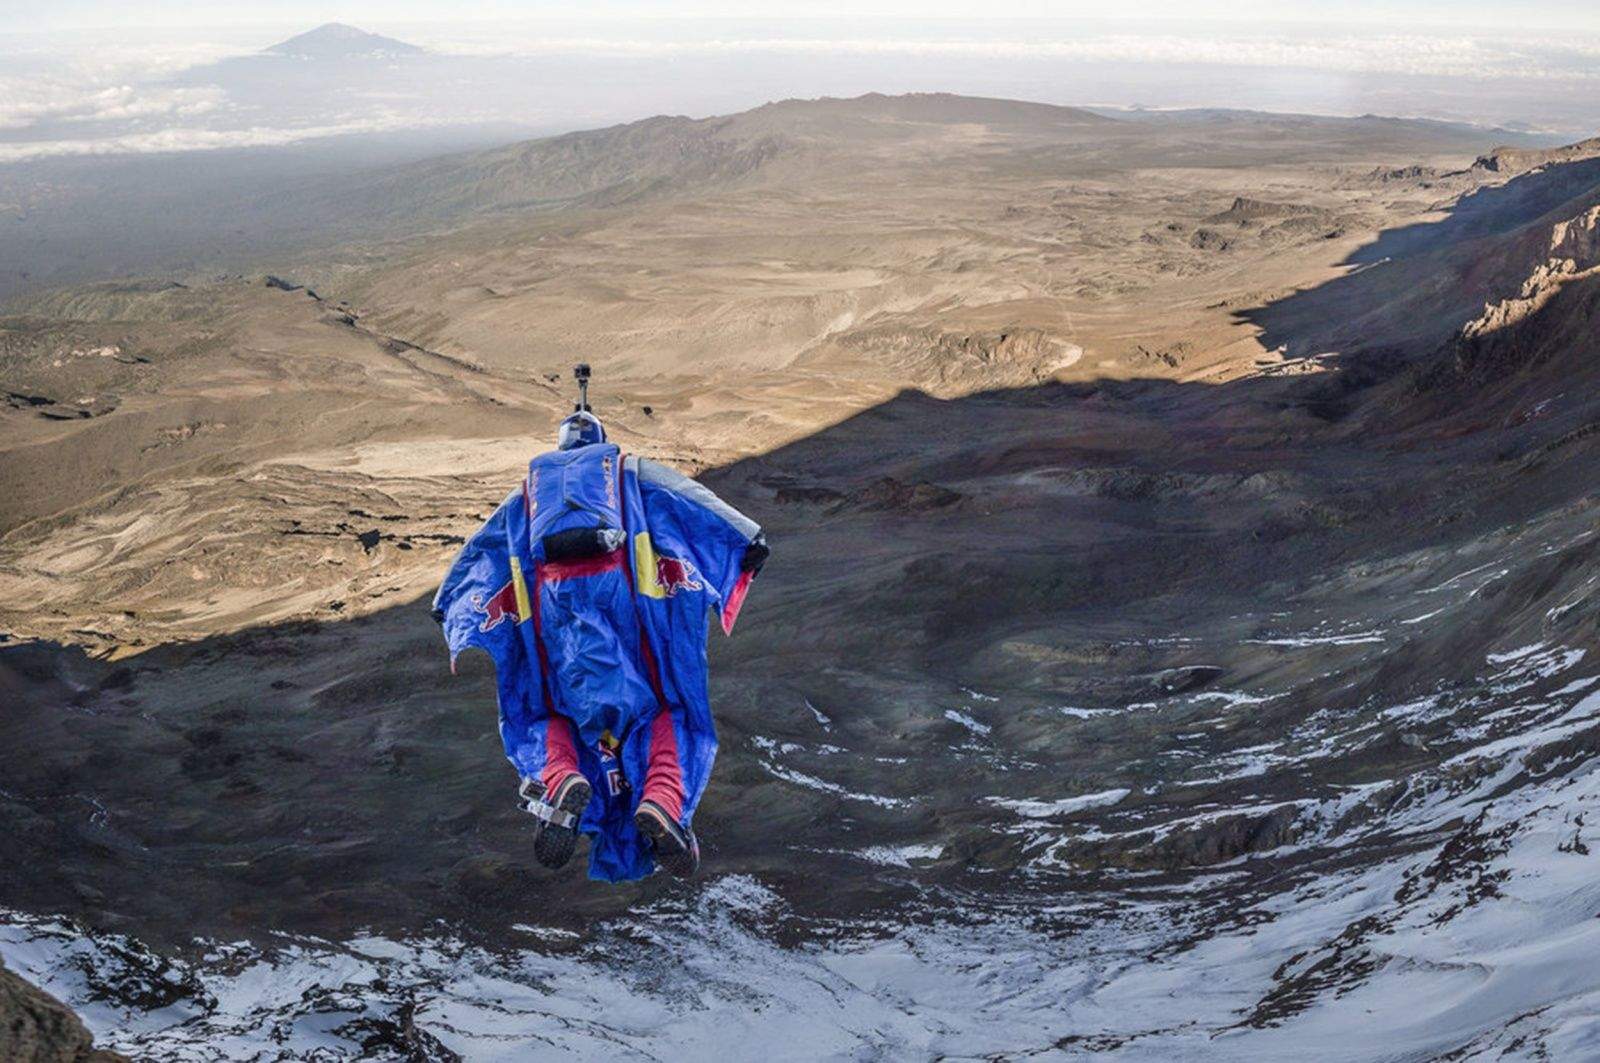 Russian BASE jumper Valery Rozov leaves his team behind after a recent wingsuit flight from Mount Kilimanjaro in Africa. Photo:  Thomas Senf / Red Bull Content Pool